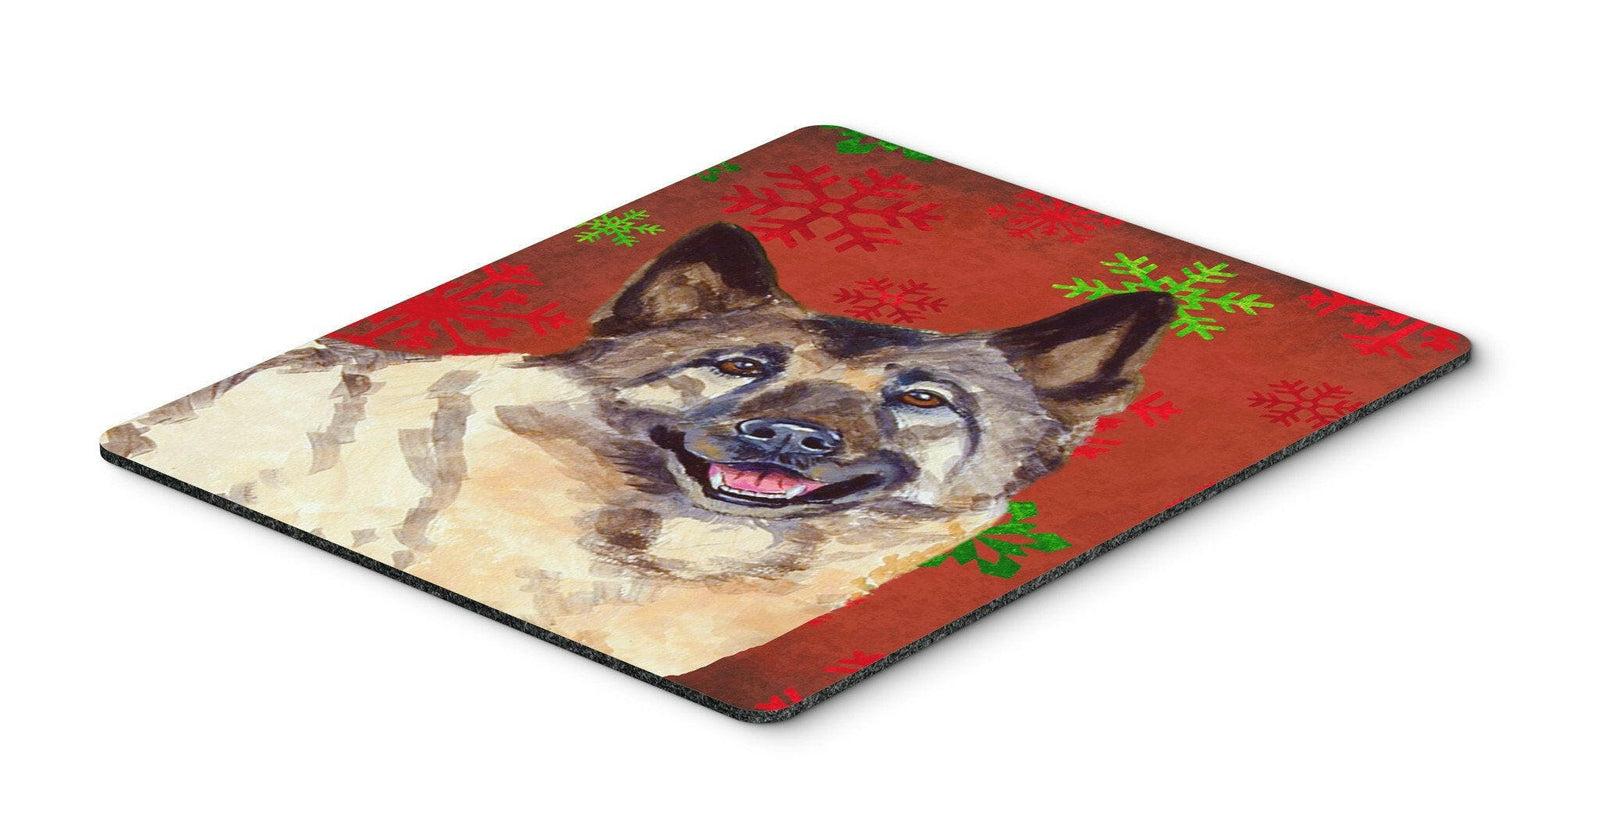 Norwegian Elkhound Snowflakes Holiday Christmas Mouse Pad, Hot Pad or Trivet by Caroline's Treasures